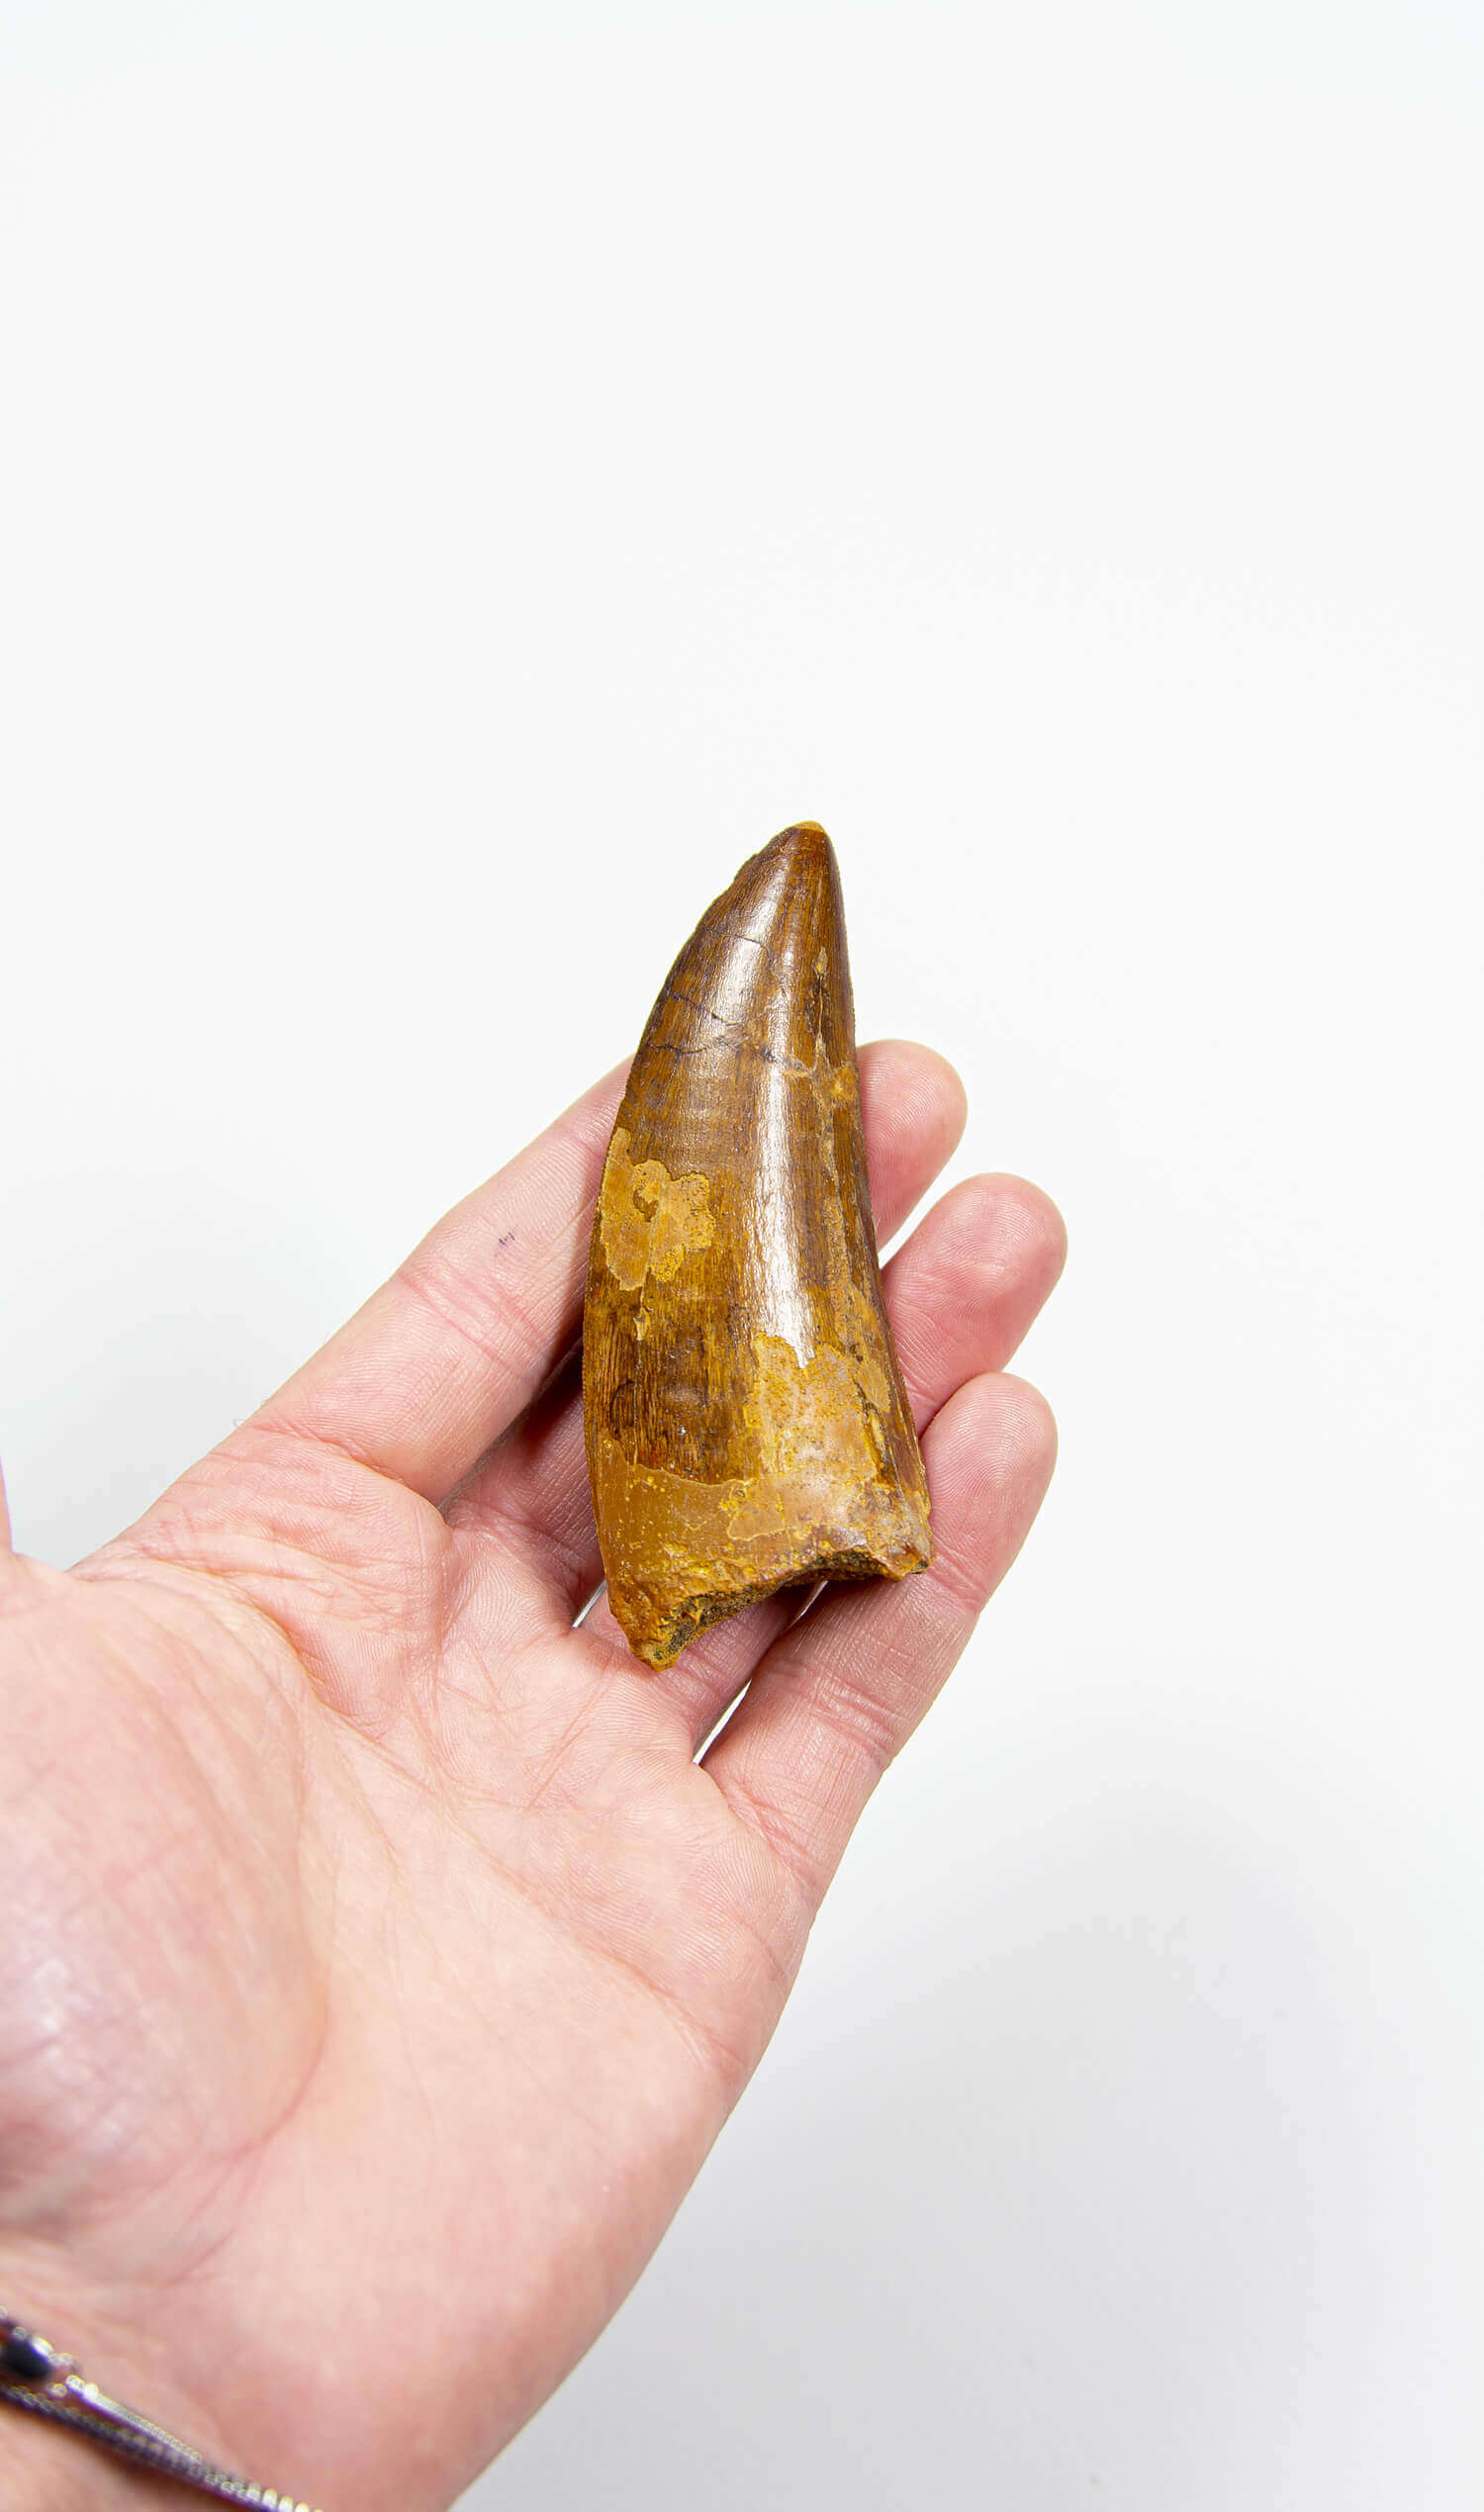 real fossil dinosaur carcharodontosaurus tooth for sale at the uk fossil store 53